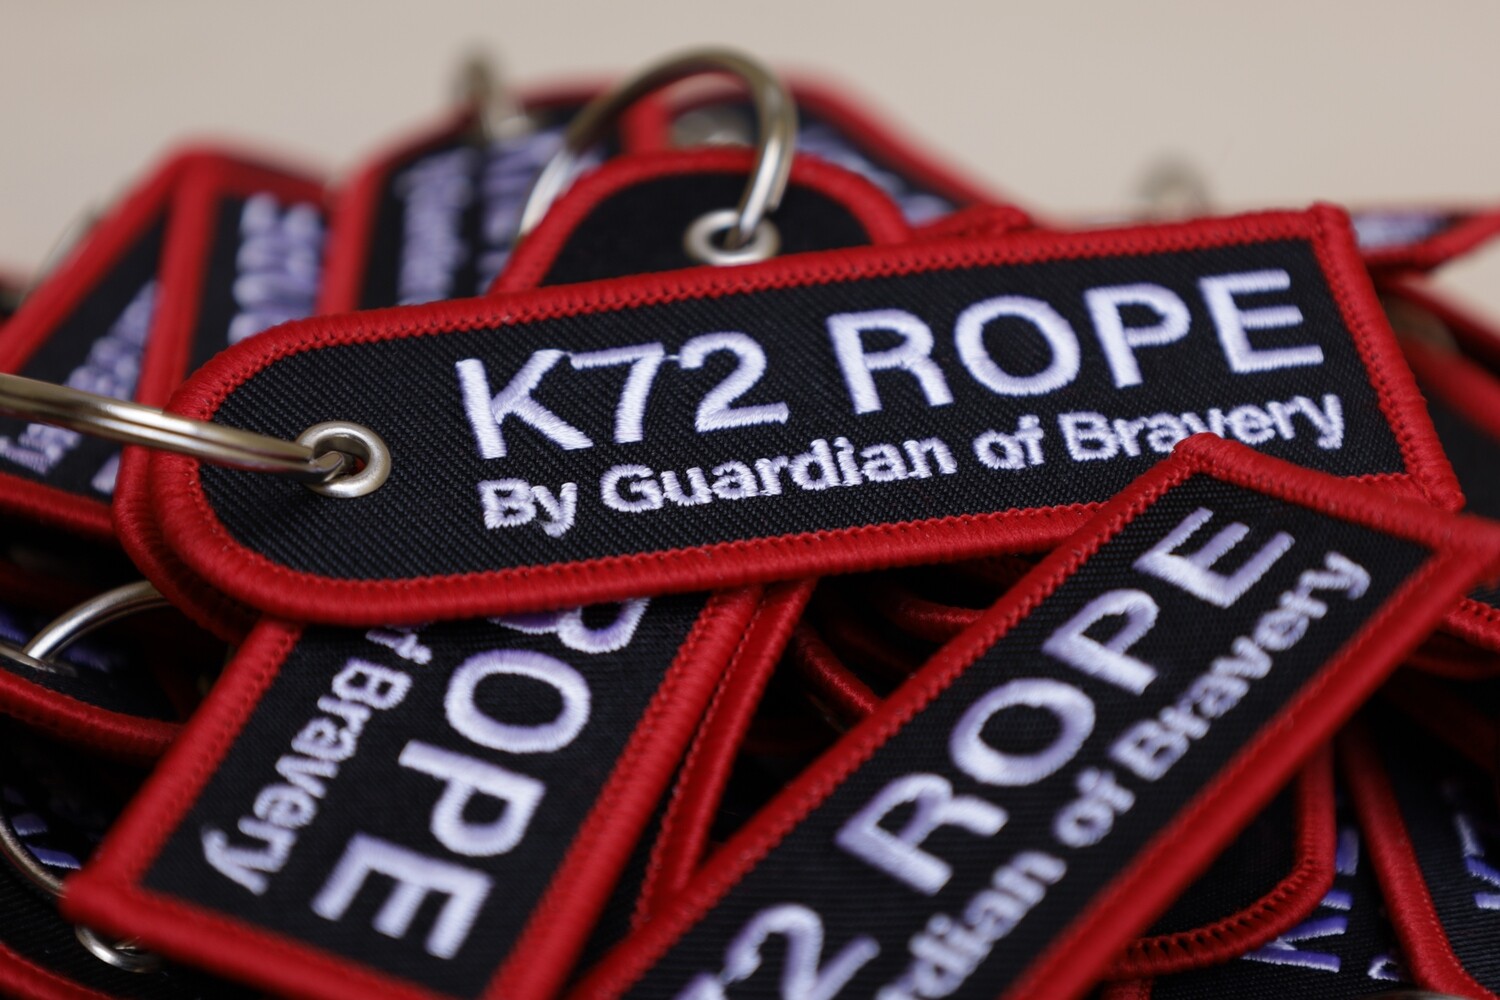 K72 Rope embroidered Keychain